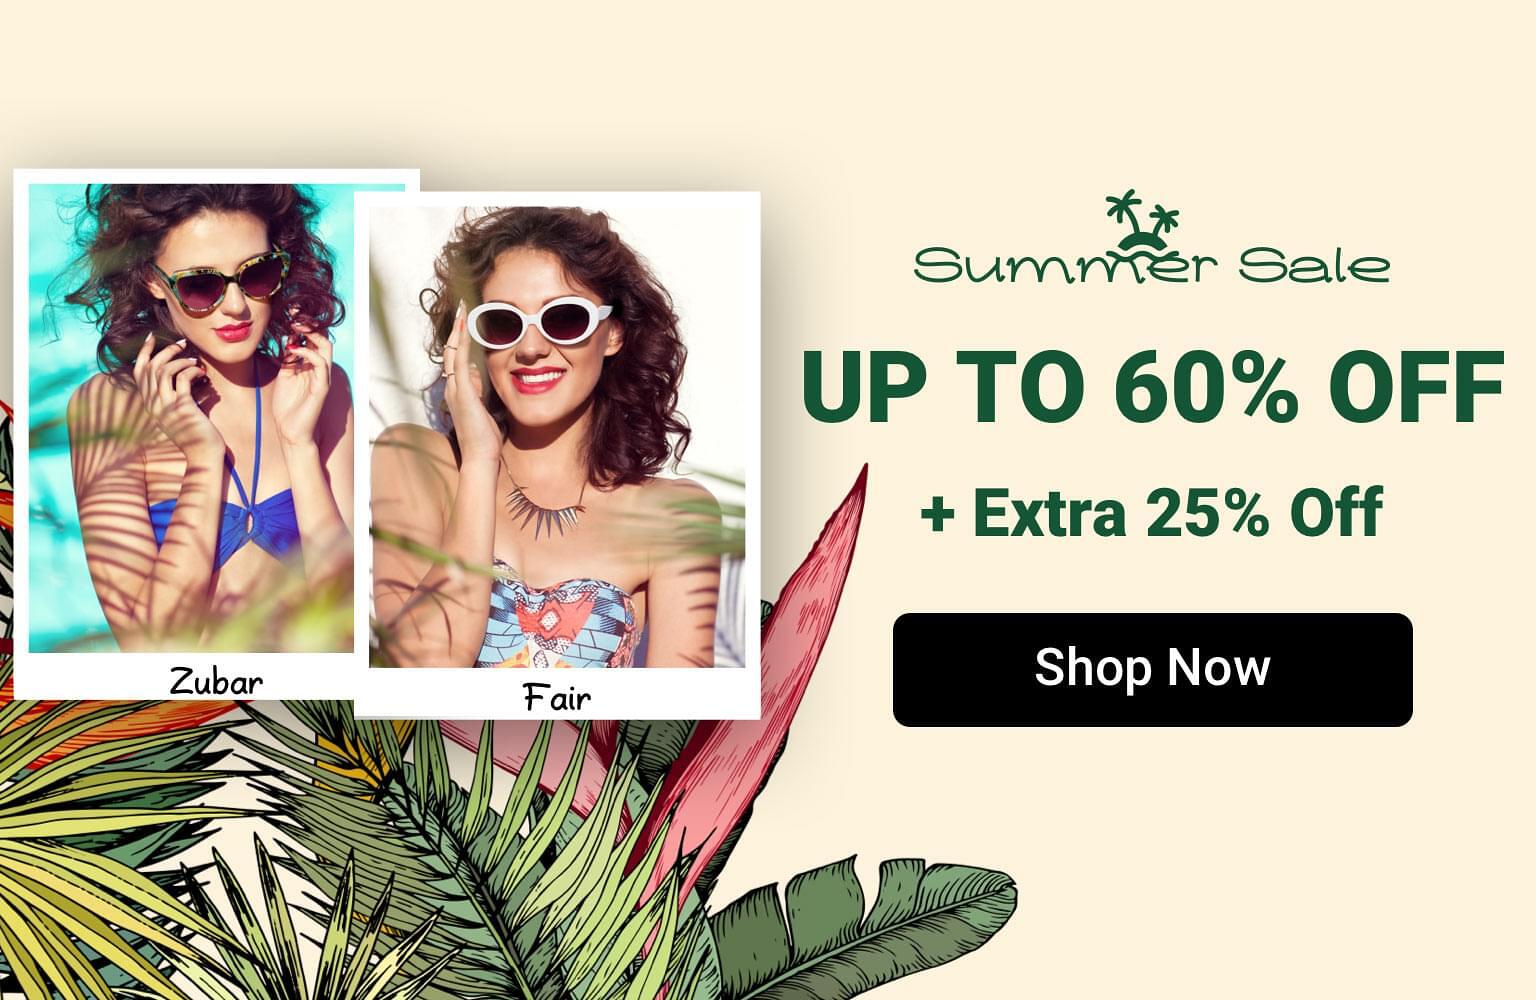 Summer Sale: Up to 60% Off + Extra 25% Off